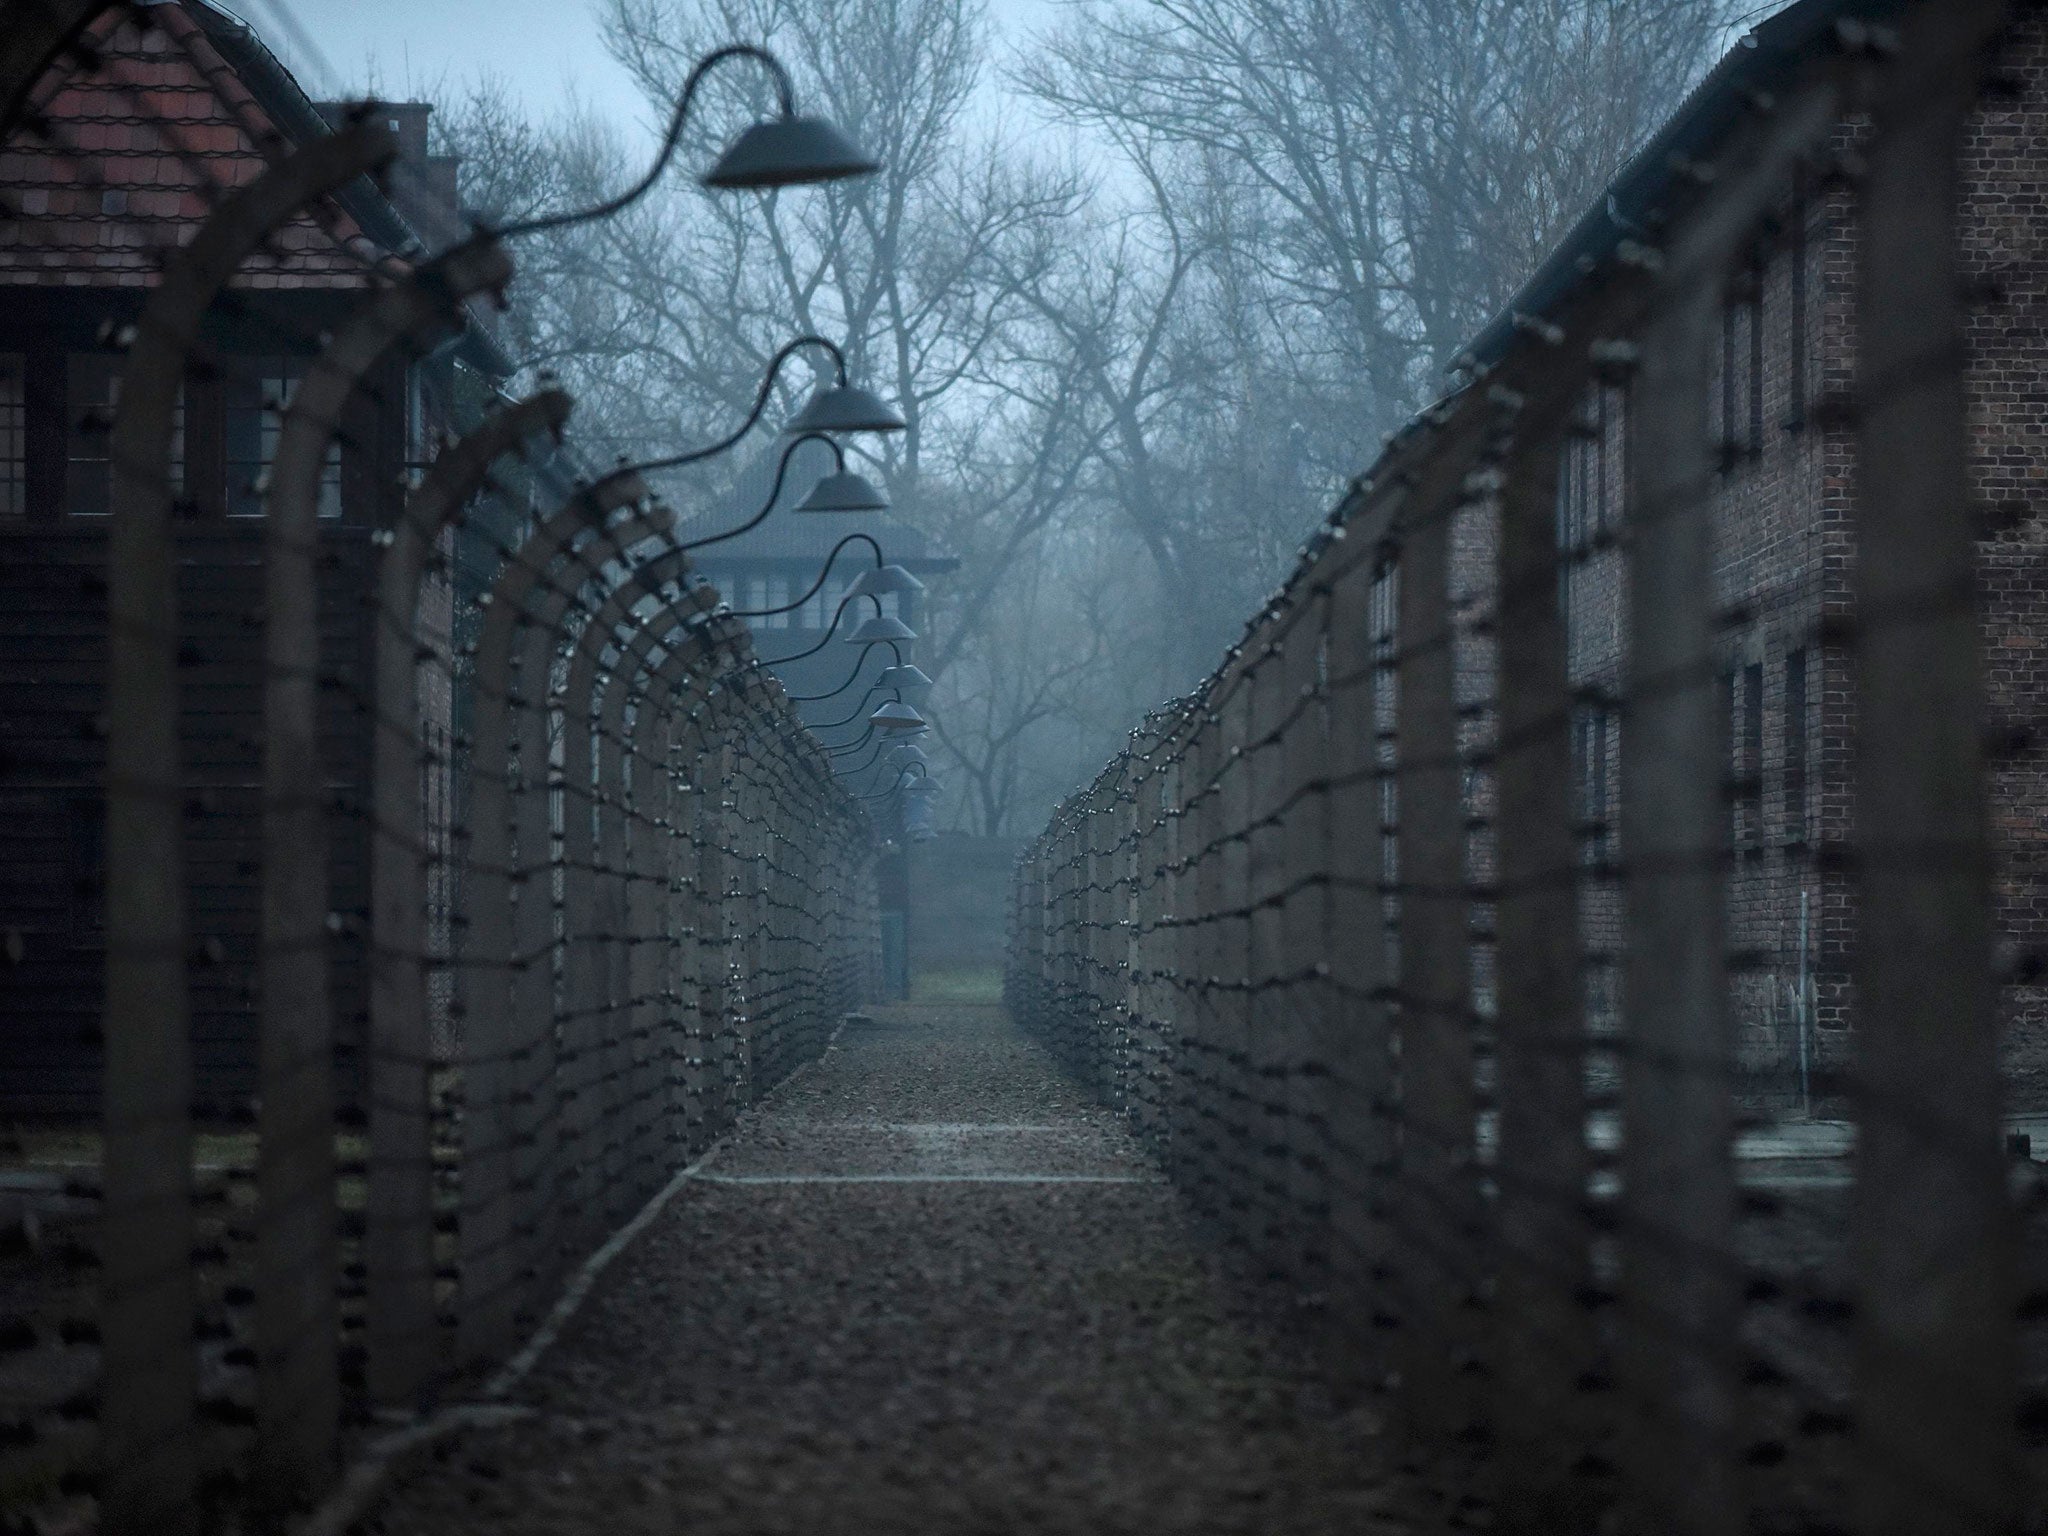 The 94-year-old man has been charged with 3,681 counts of accessory to murder on allegations he served in the Nazis' Auschwitz death camp